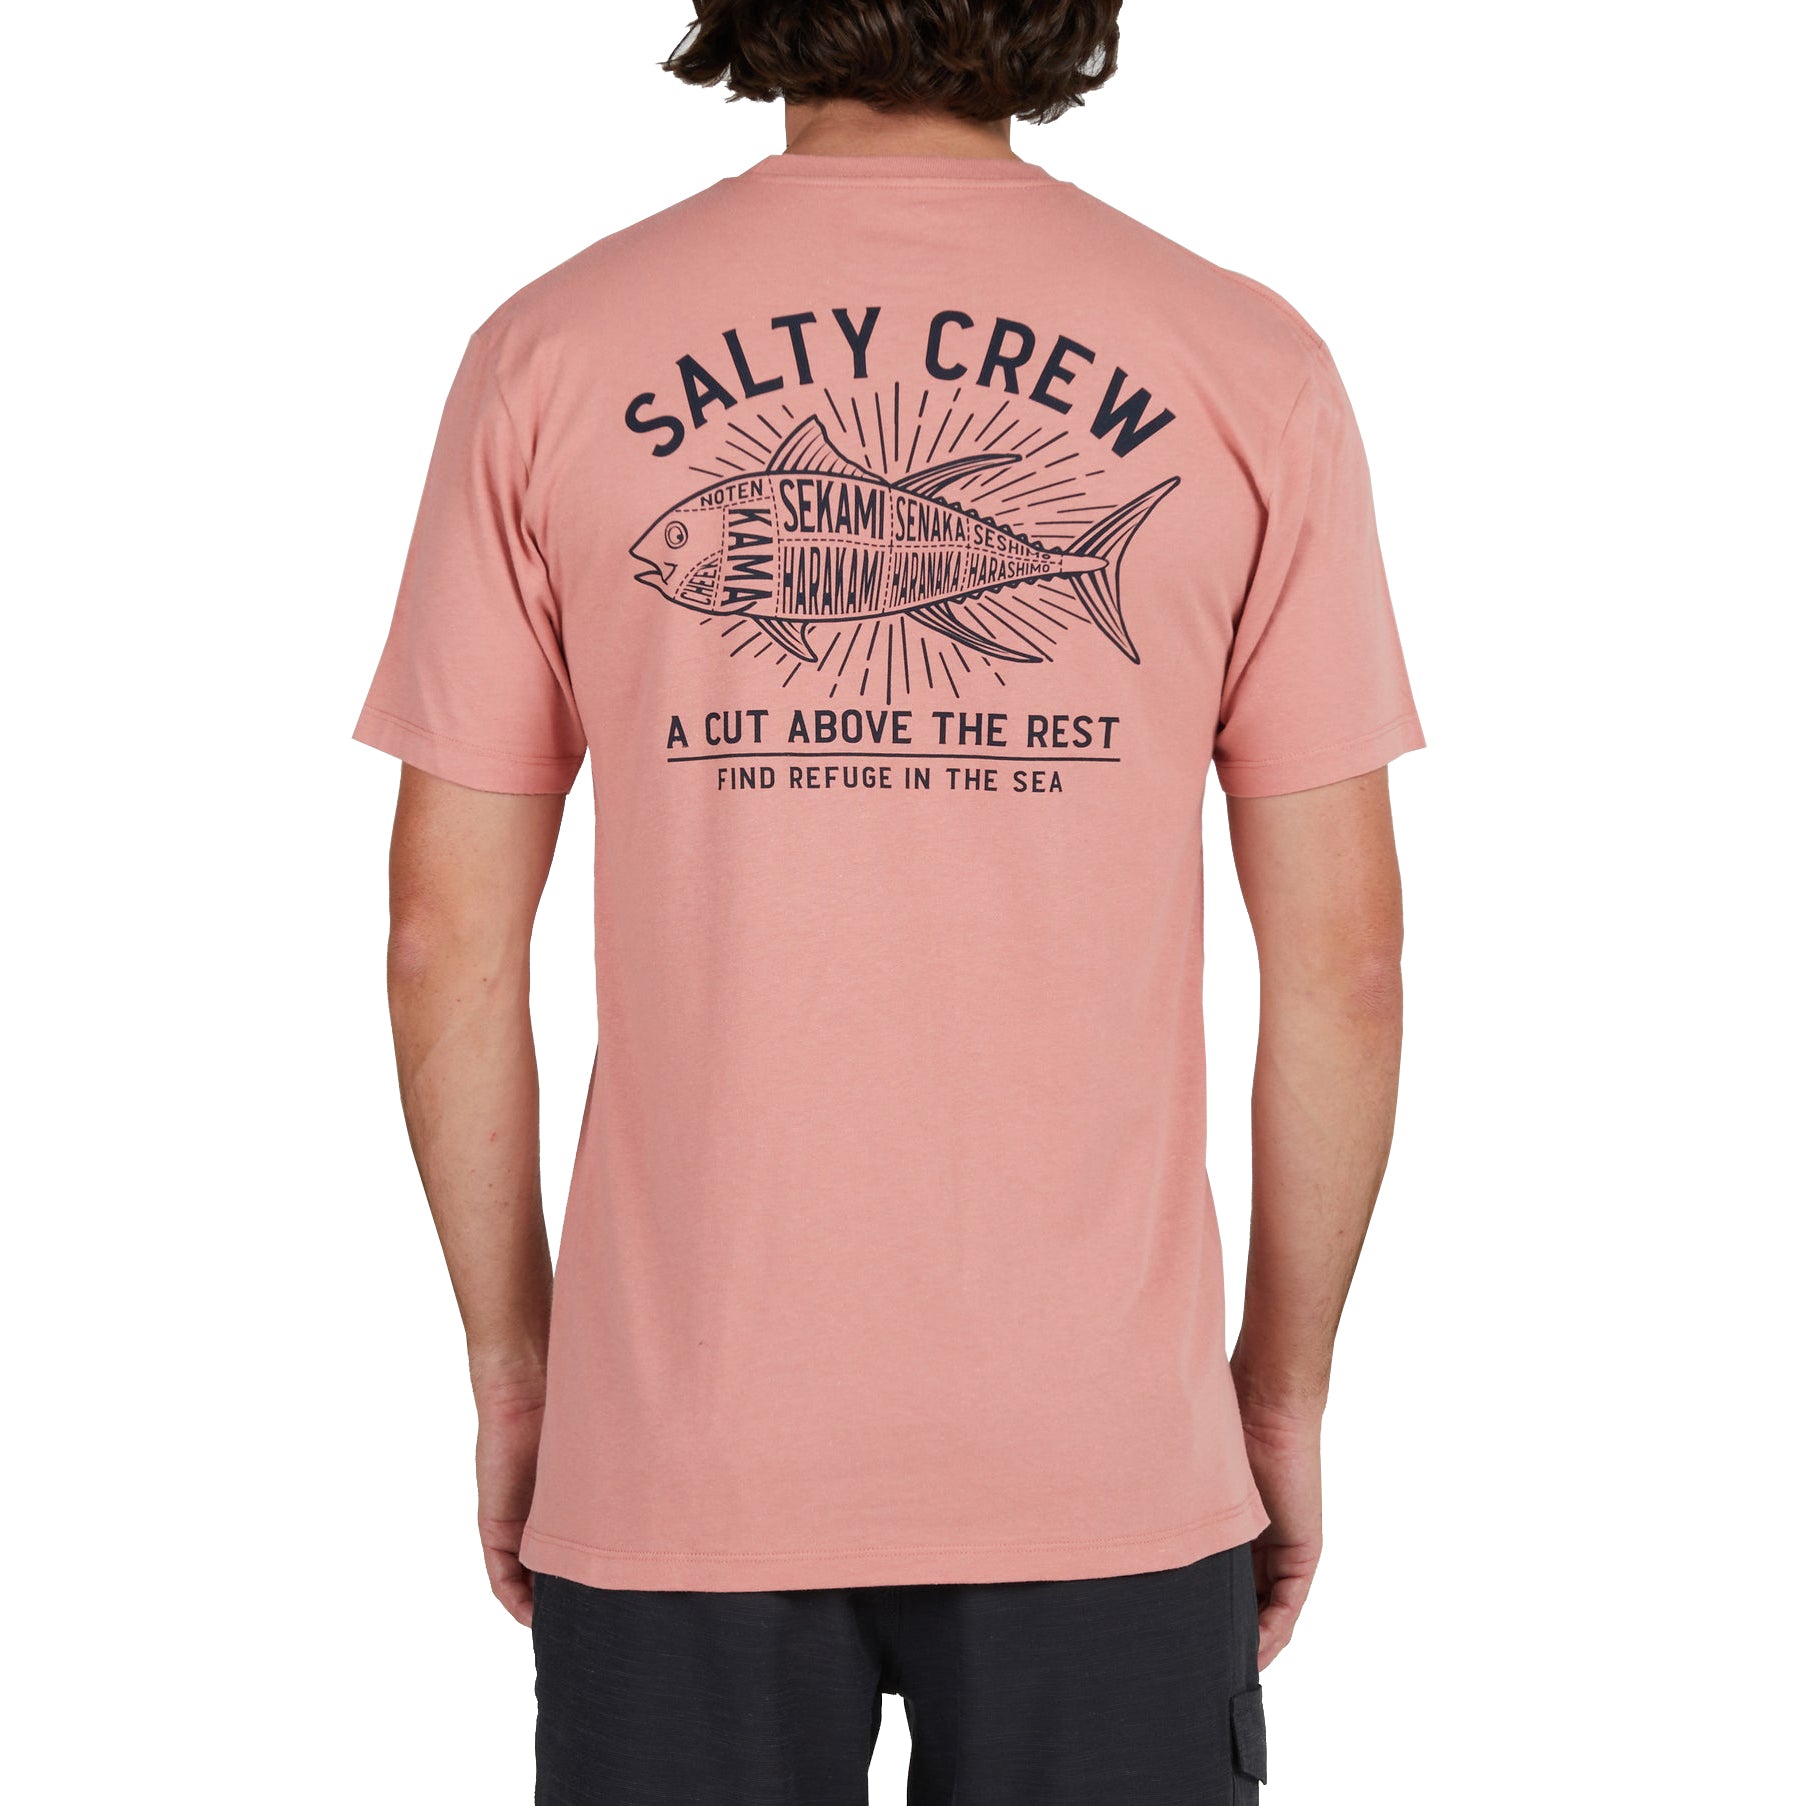 Salty Crew Cut Above SS Tee Coral S